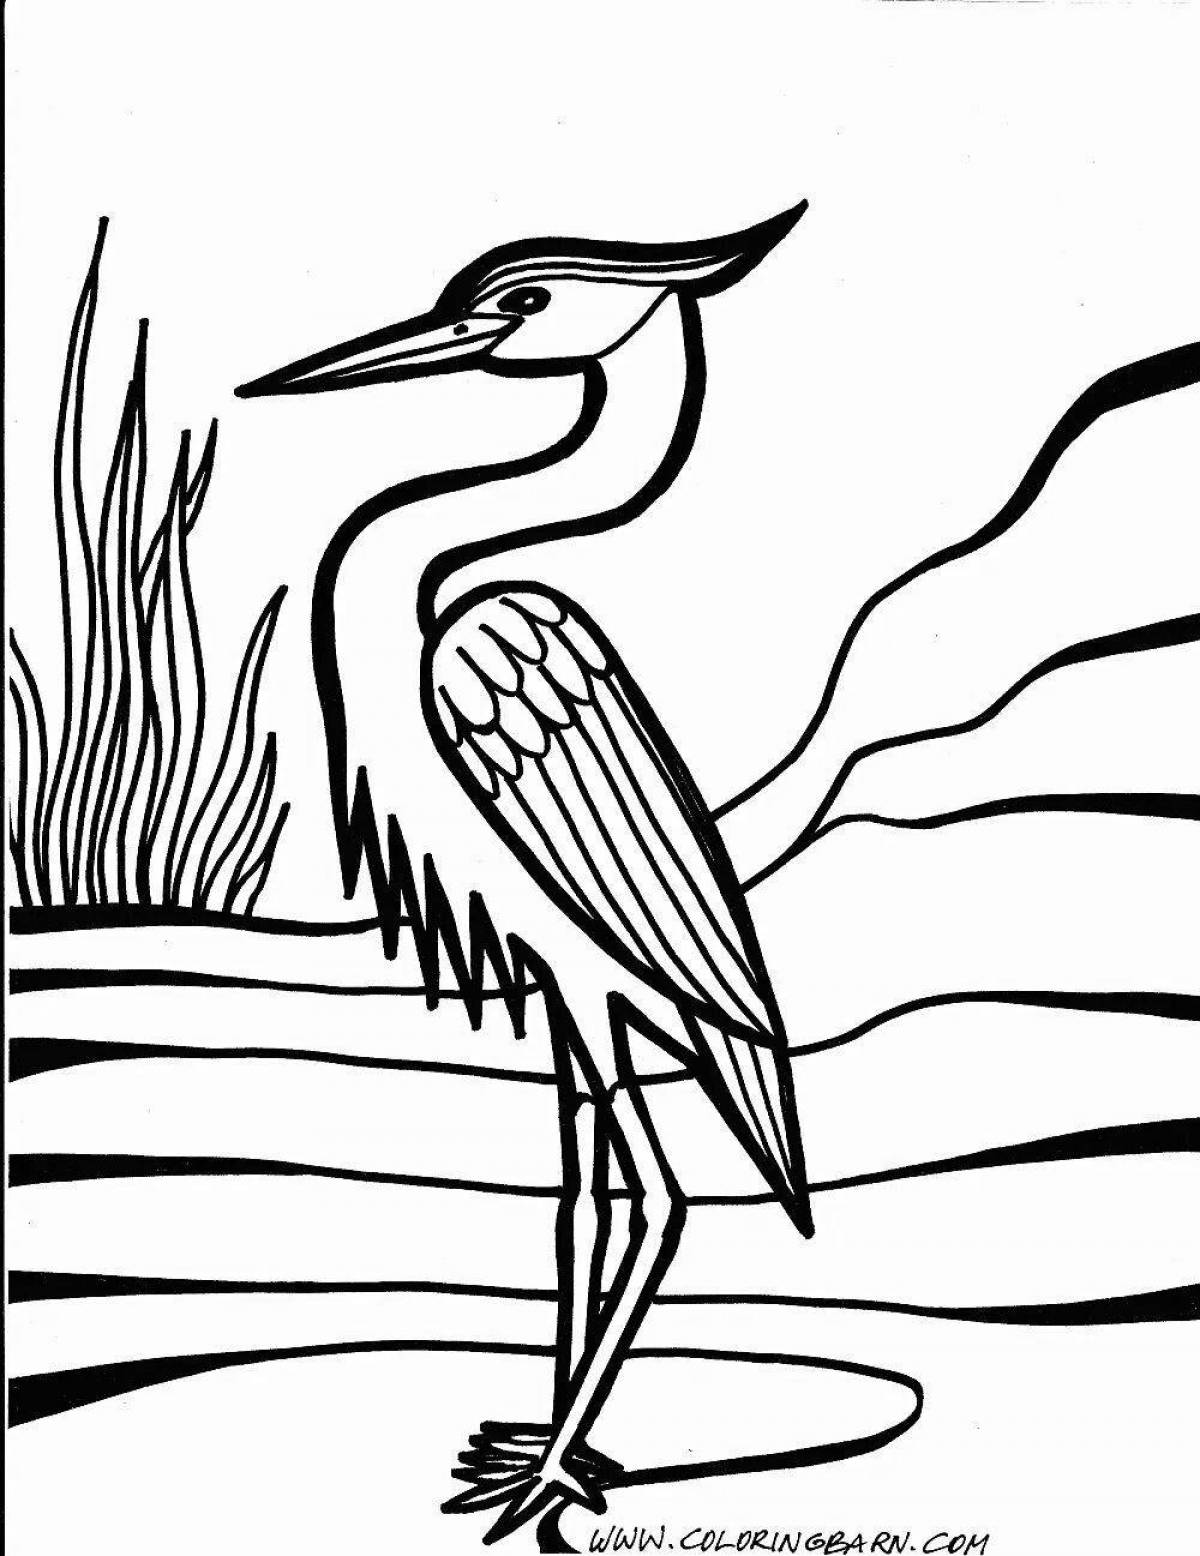 Weird heron coloring book for kids